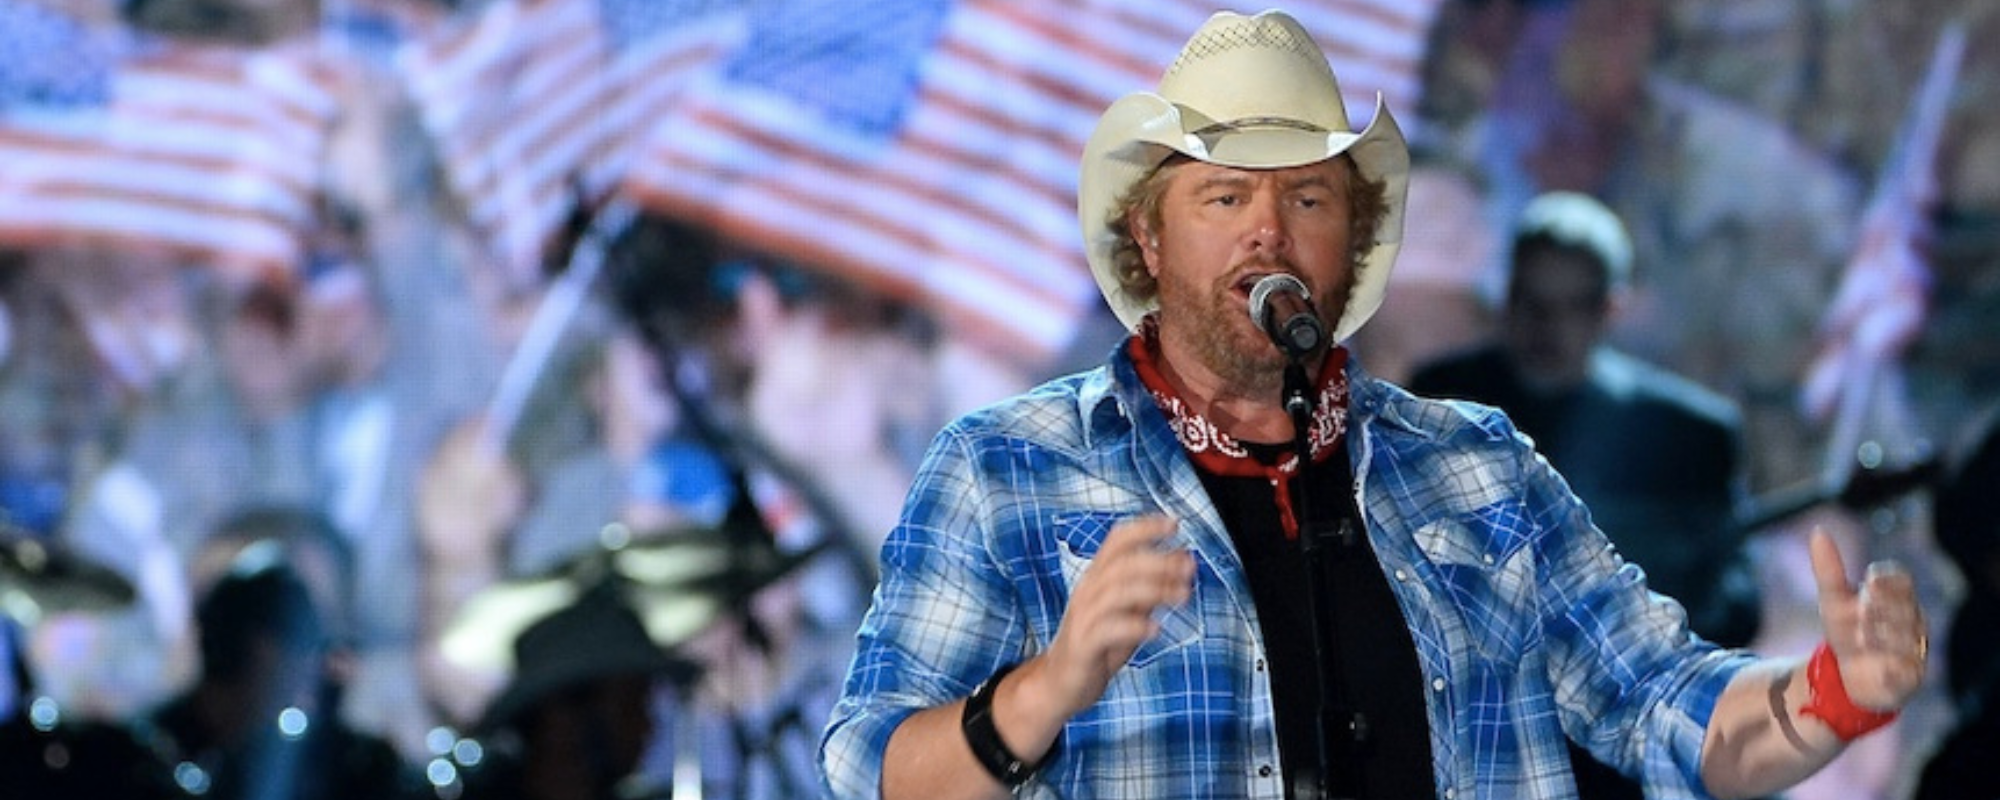 The Meaning Behind Toby Keith’s Unwavering “American Soldier”